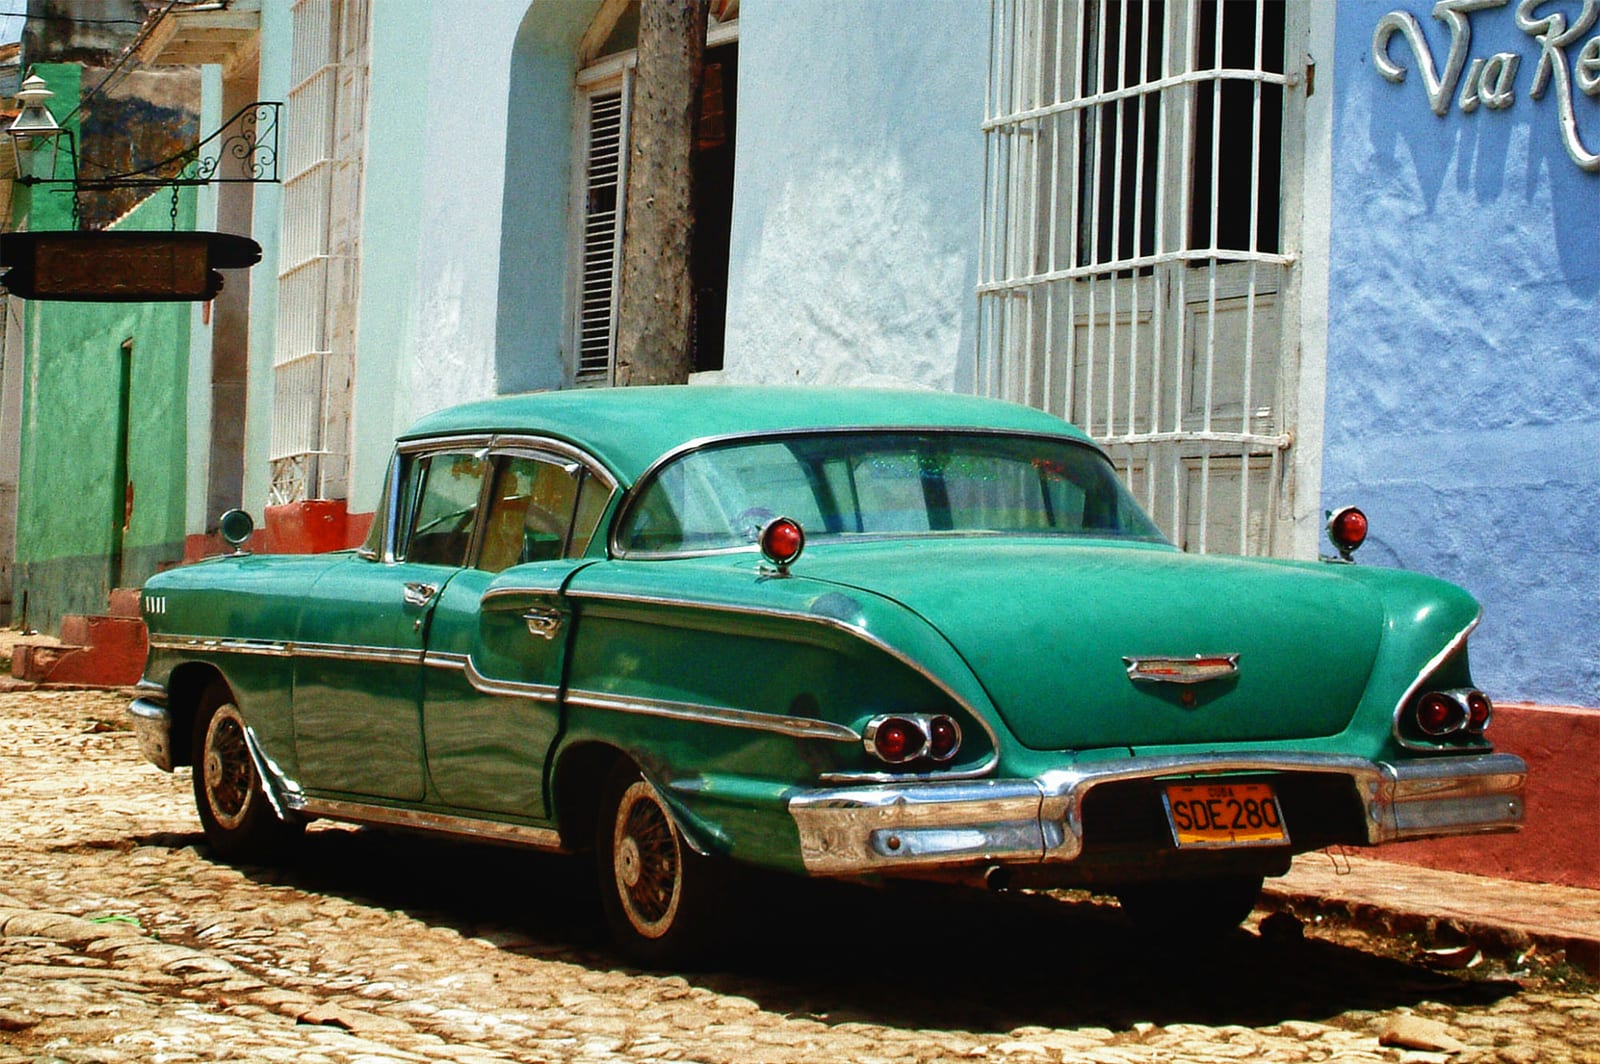 Cuba - Travel, Safety Advice, Health Insurance, and ...